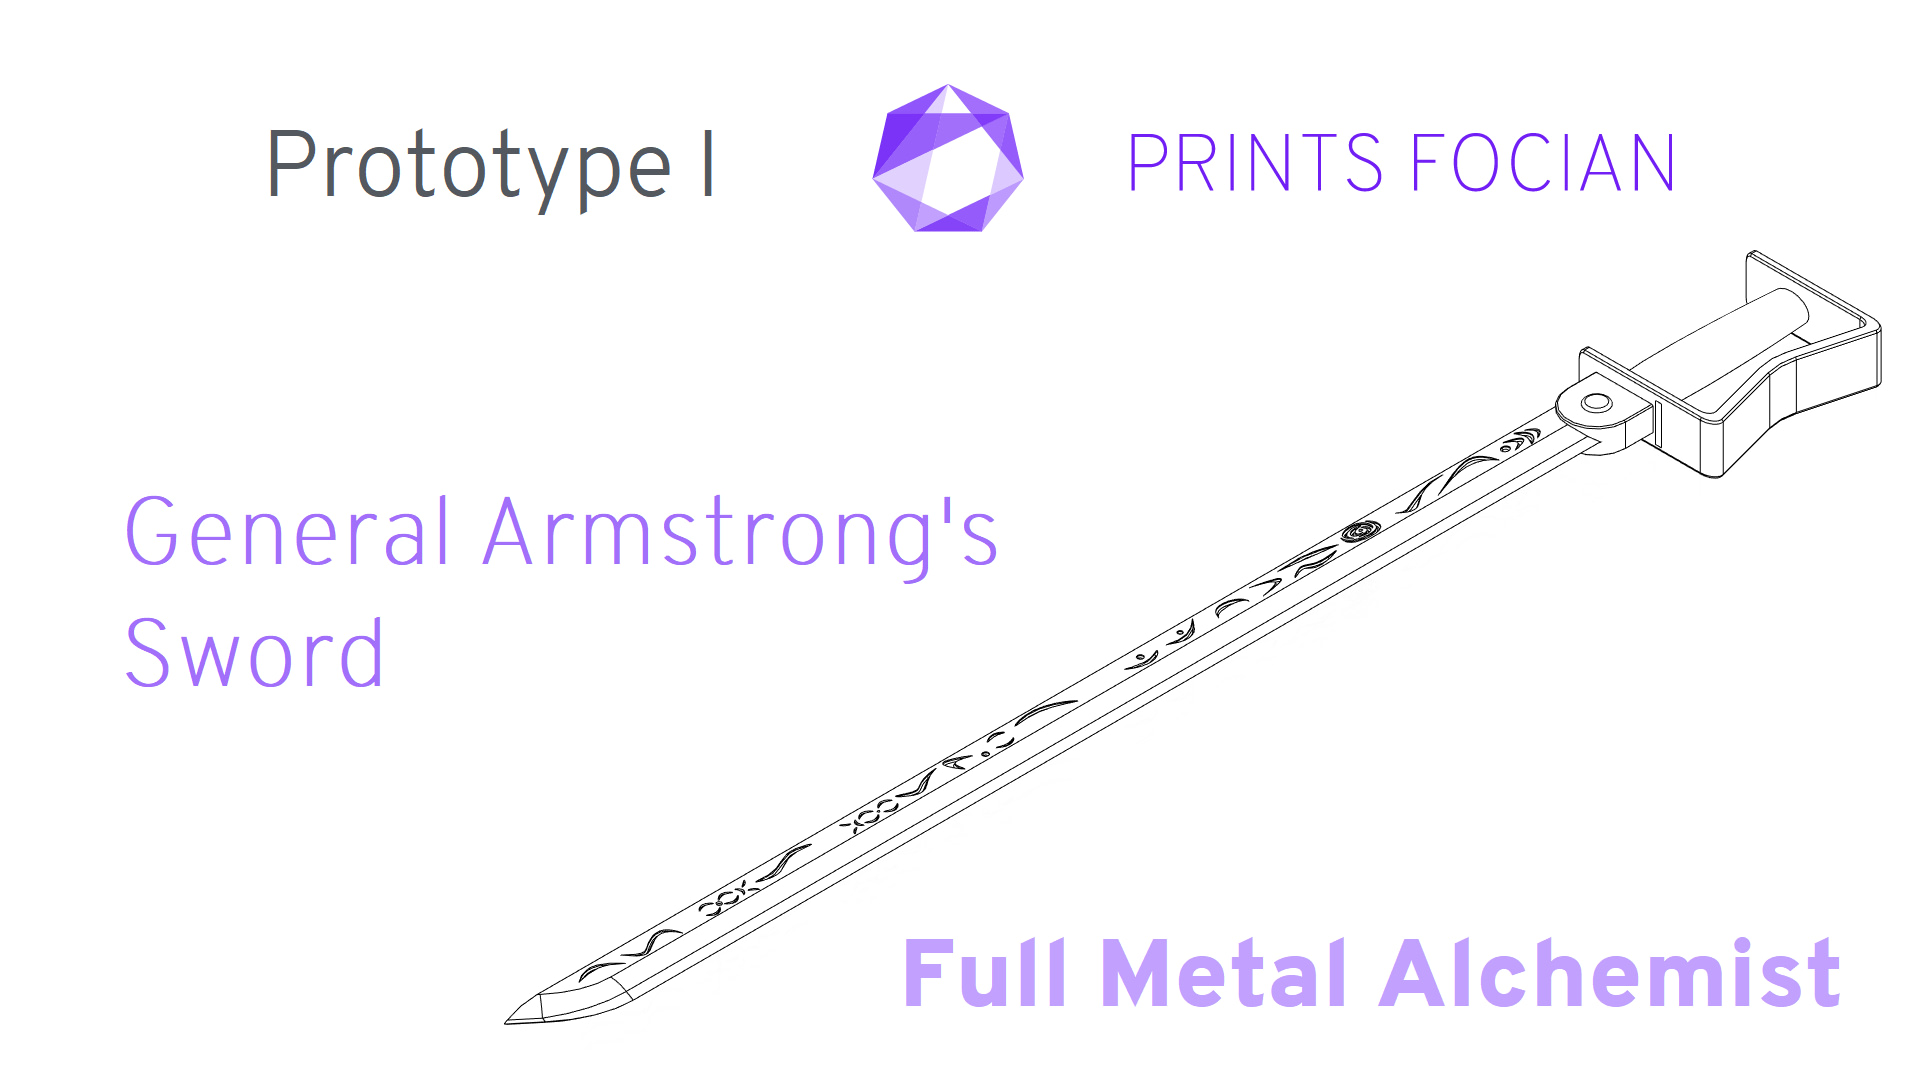 Wireframe image of the General Armstrong's Sword on a white background. Prints Focian Icon top and central. Text: Purple Prints Focian, General Armstrong's Sword, Full Metal Alchemist and dark grey Prototype I